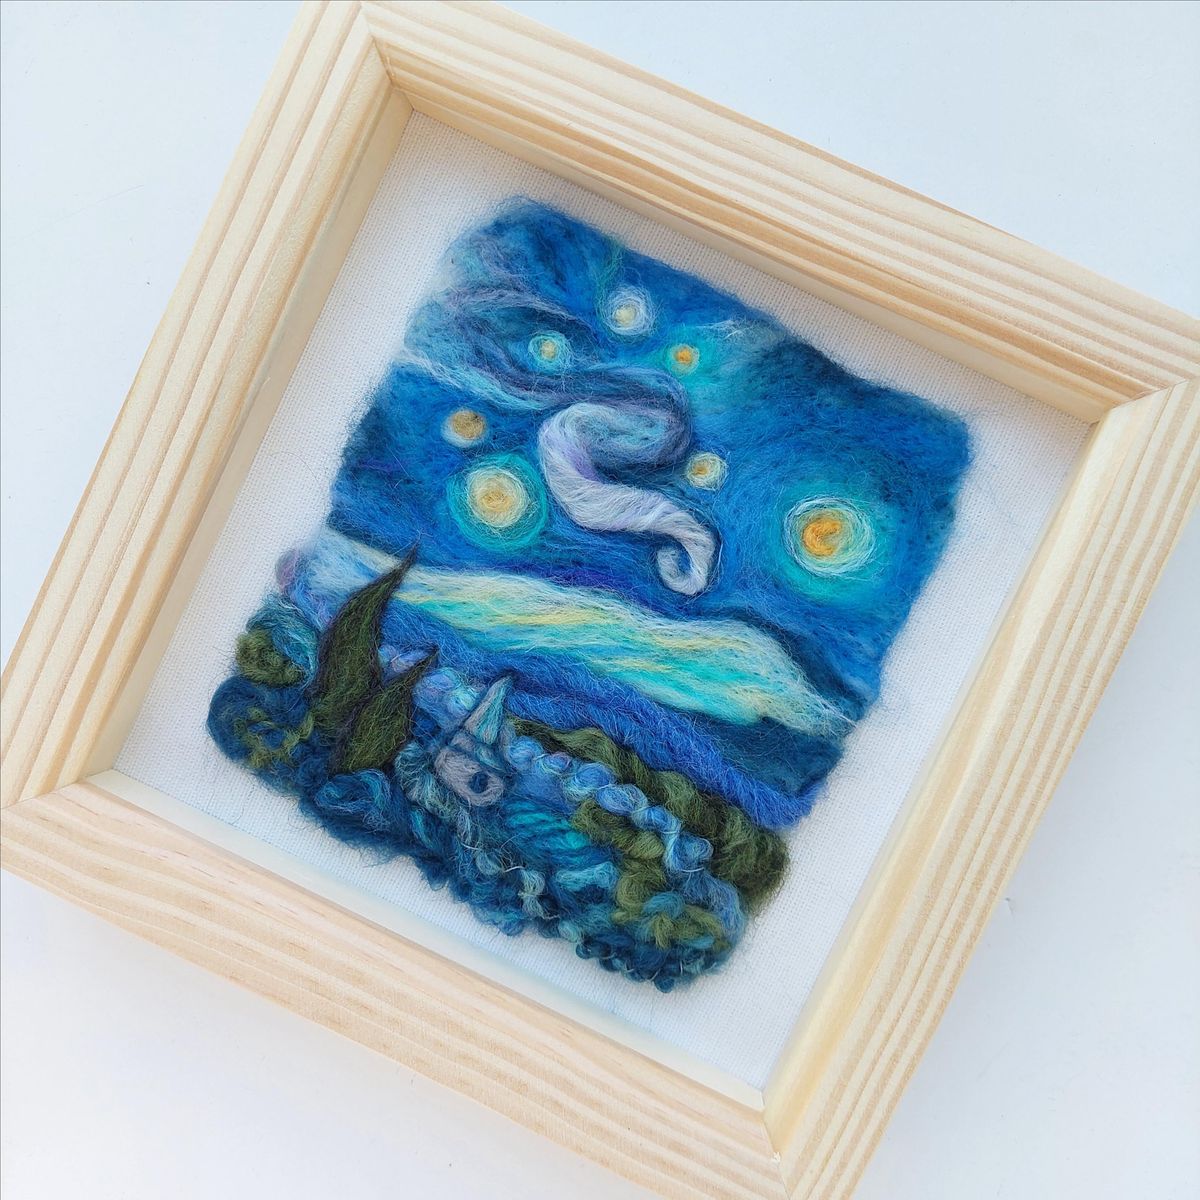 A Starry Night in Needle Felting